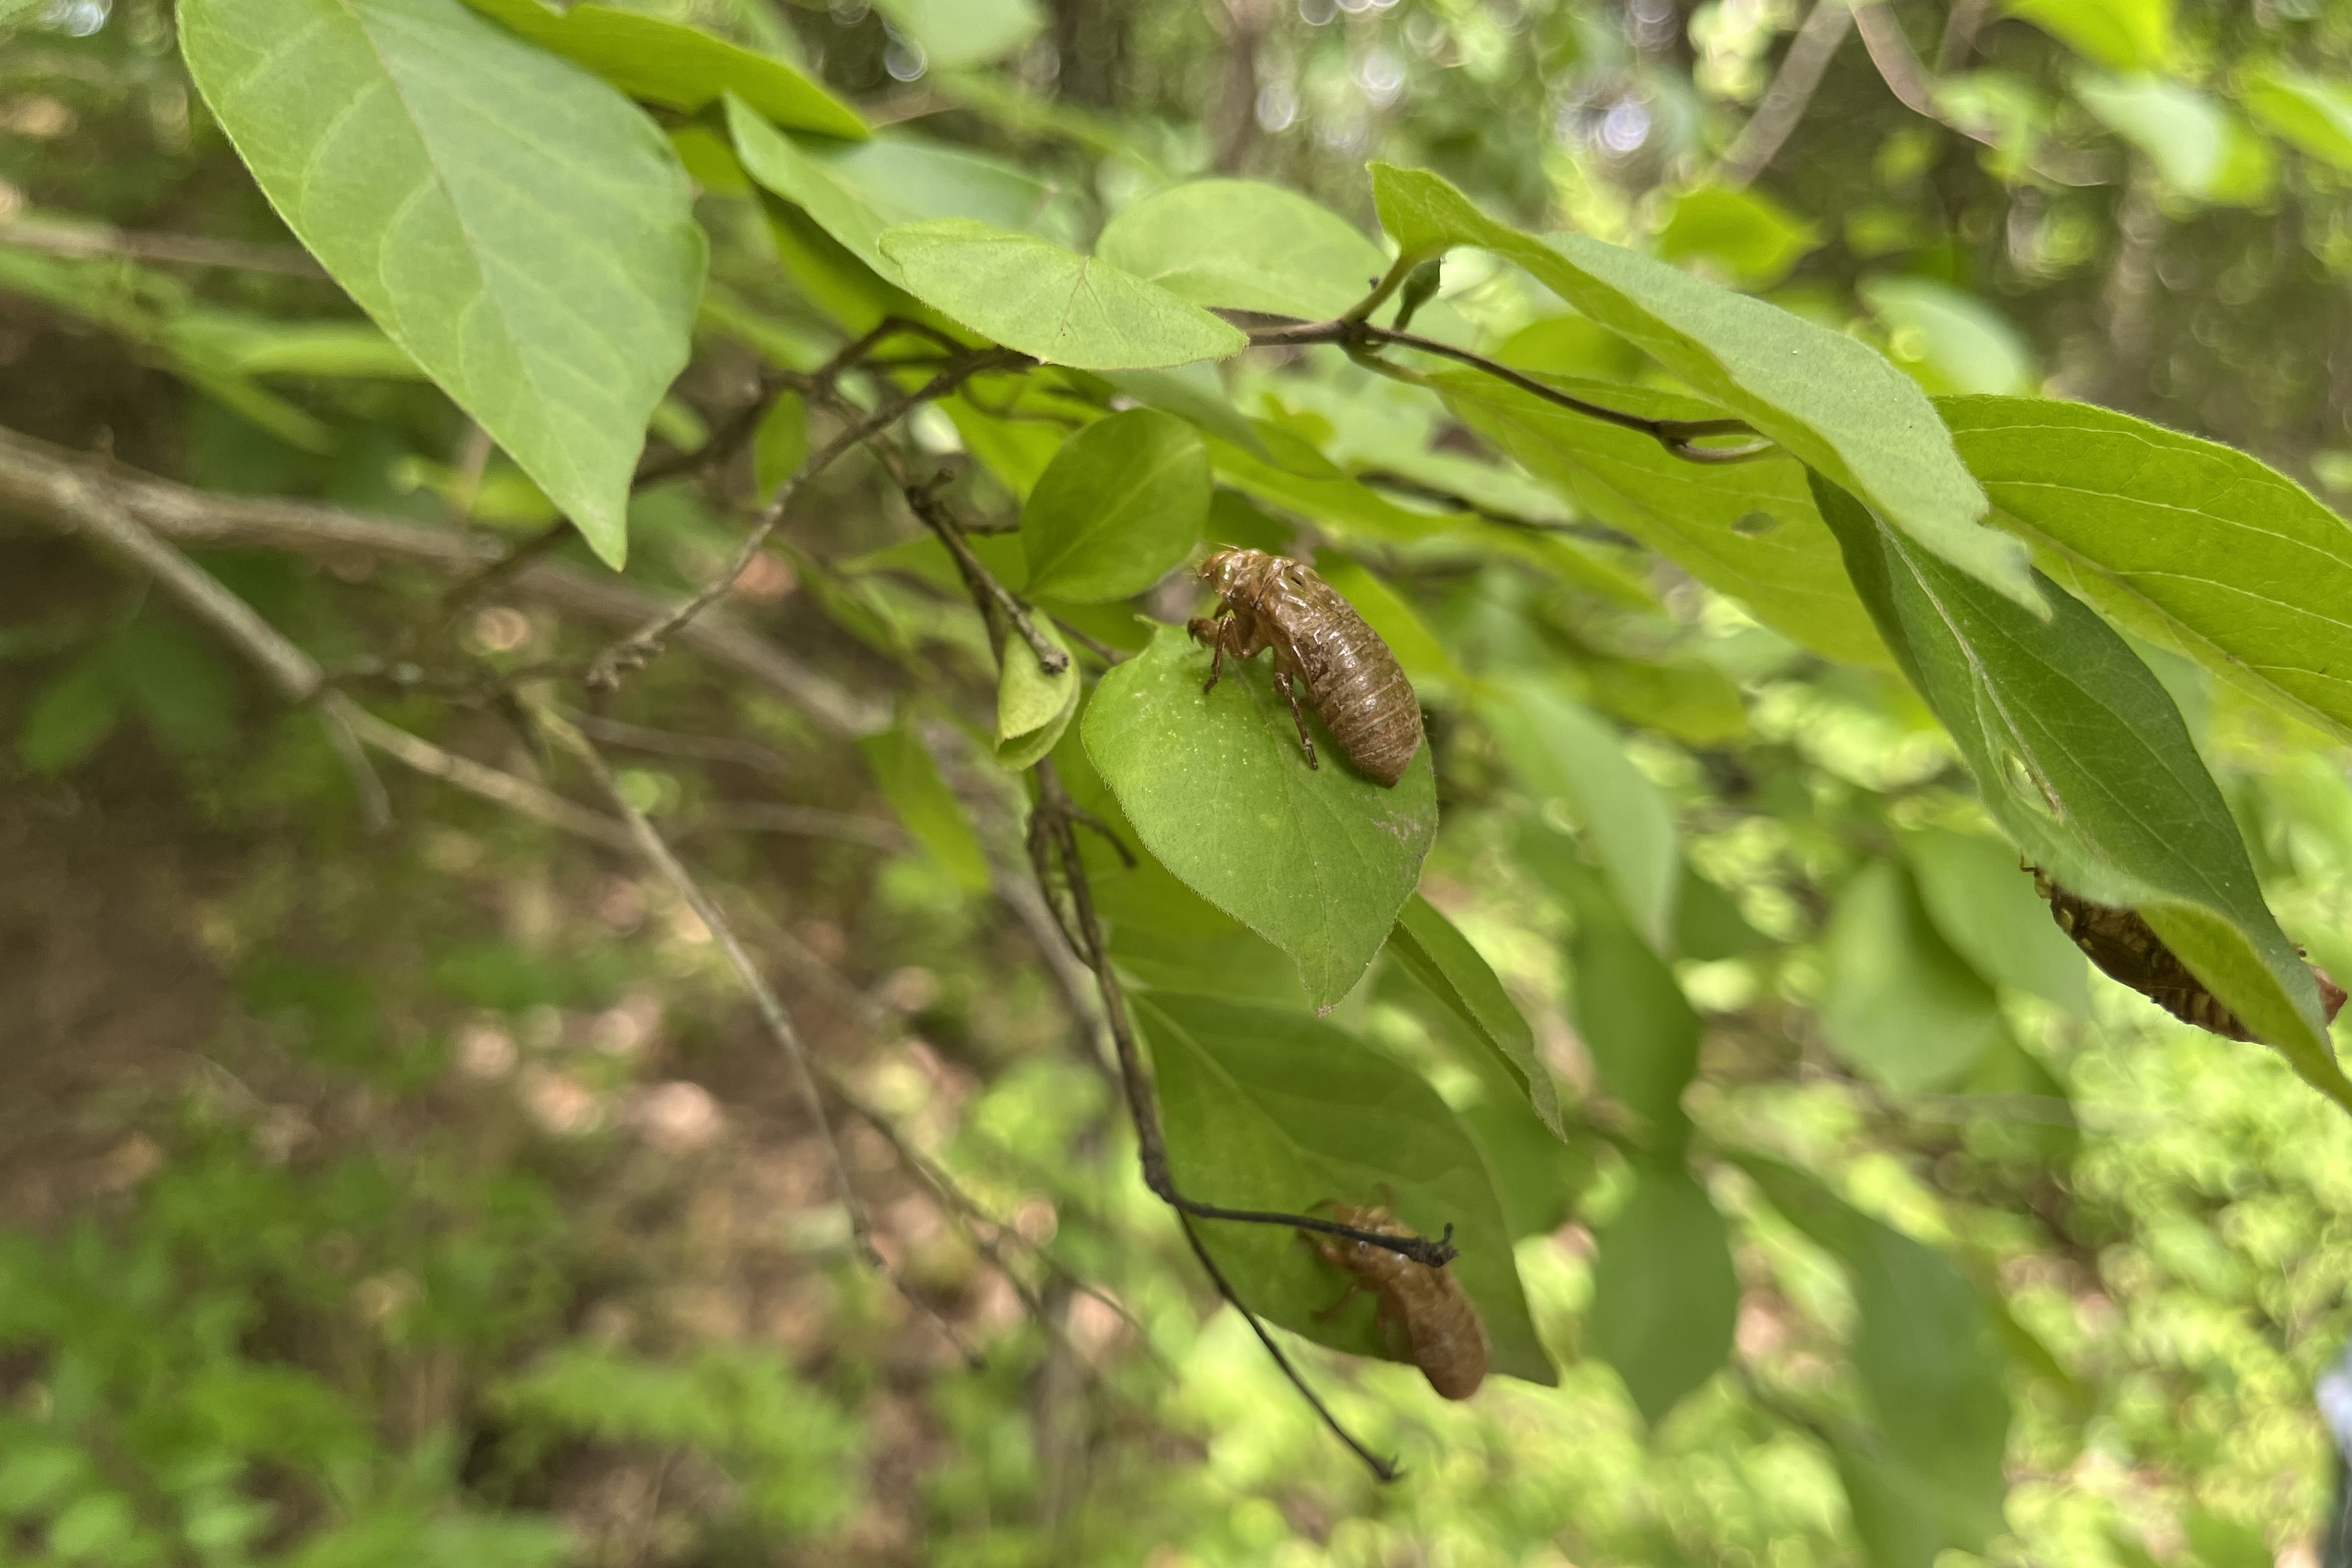 Cicada exoskeletons are attached to a few leaves on a tree branch.